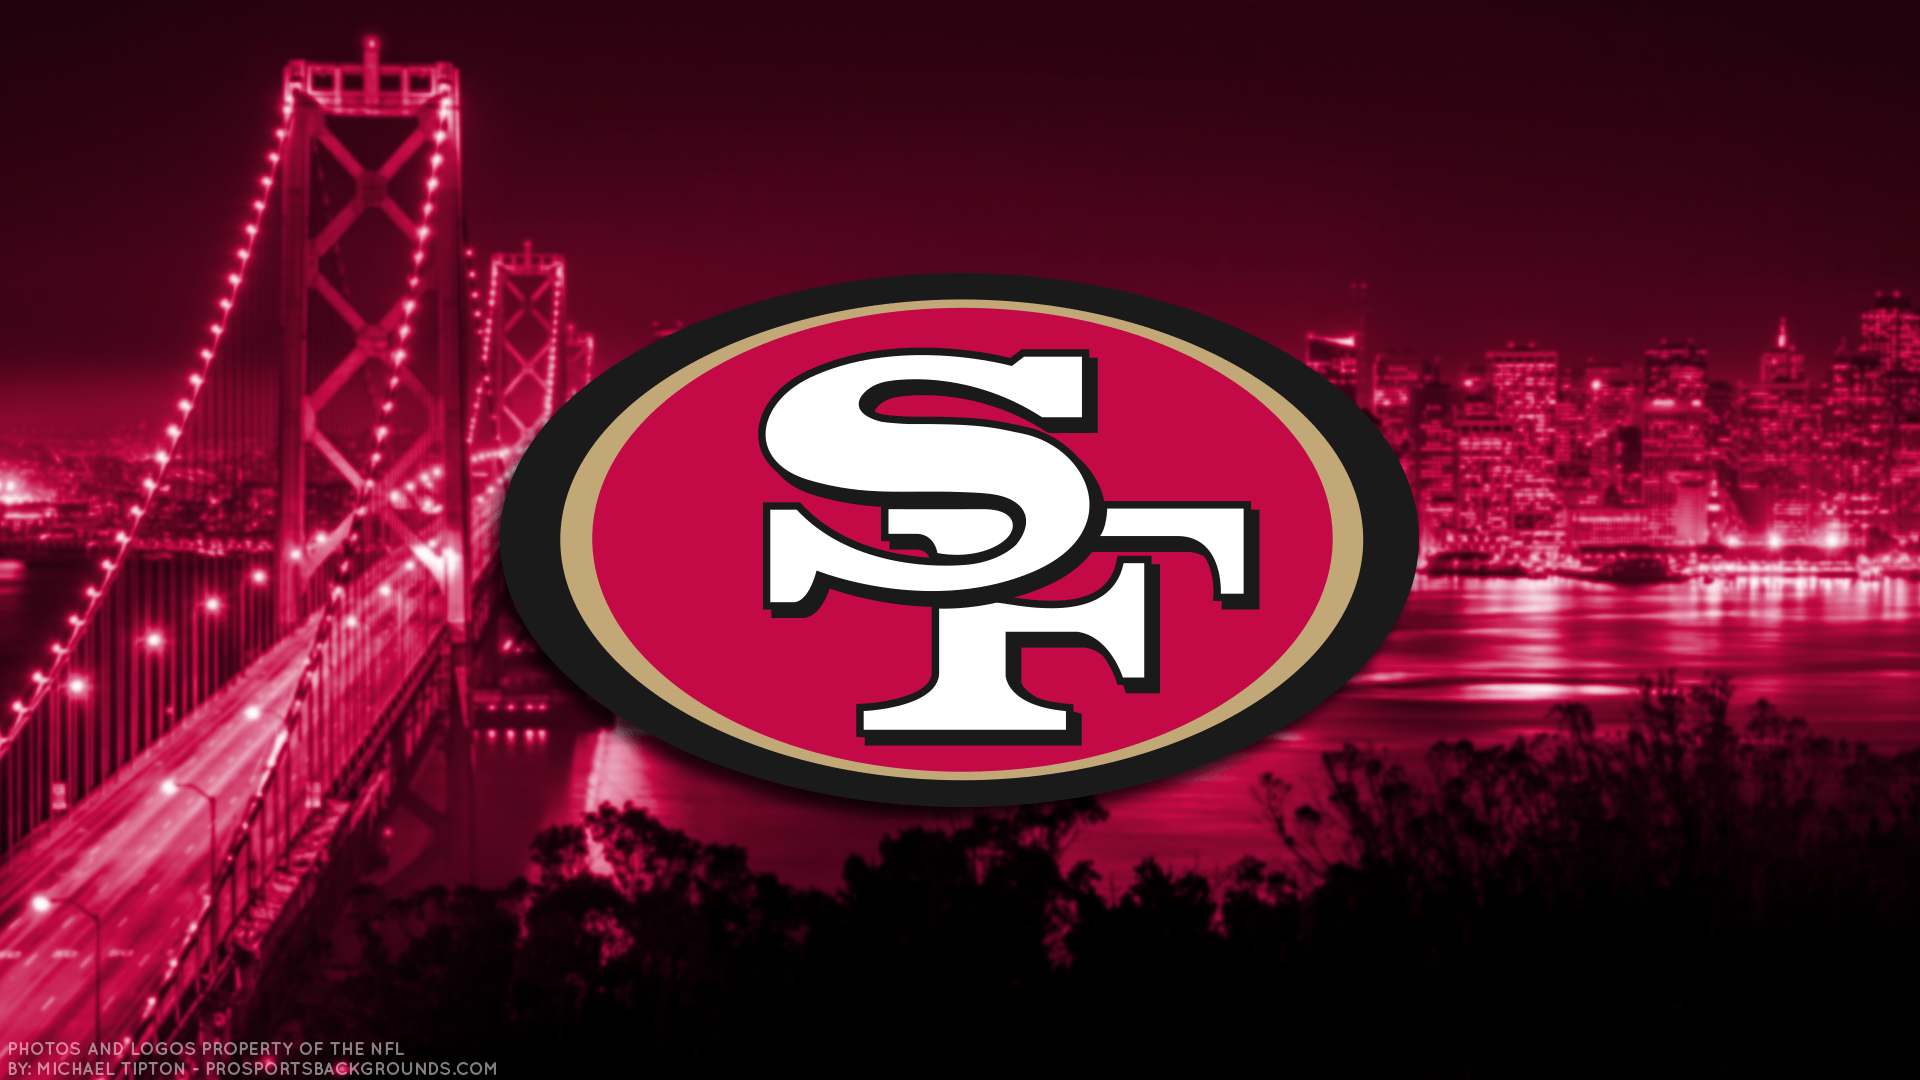 San Francisco 49ers Wallpaper. iPhone. Android